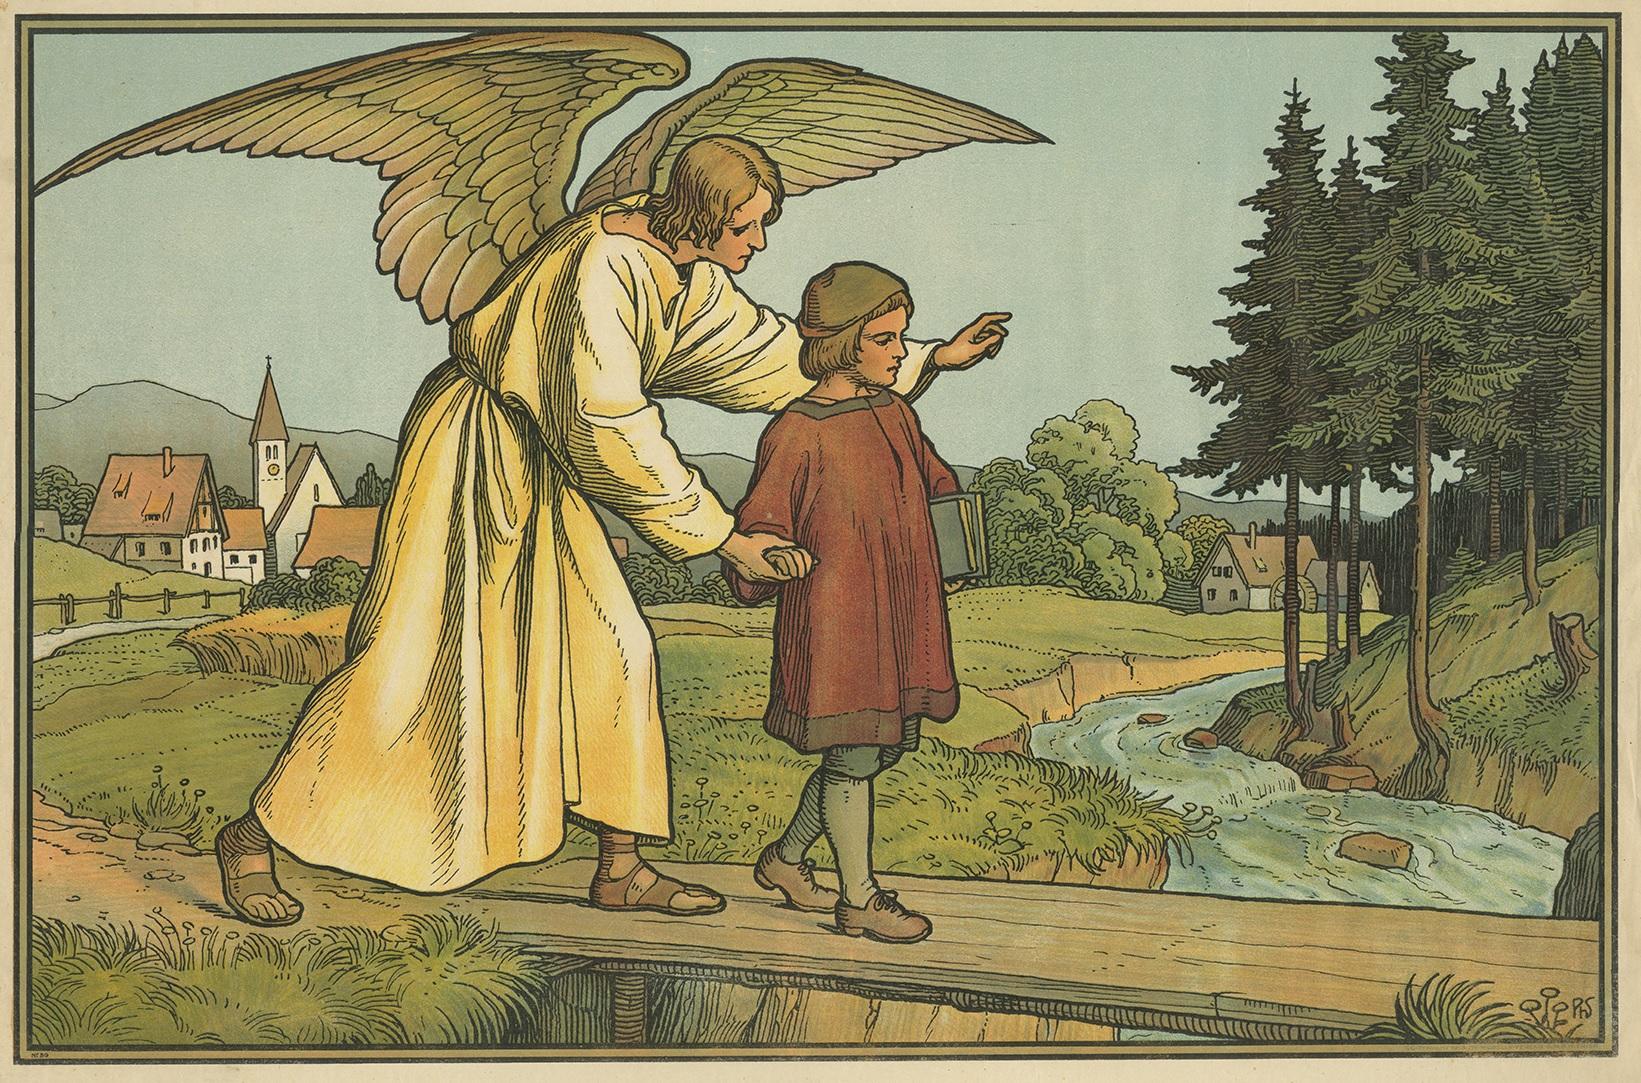 Large antique print of the Guardian Angel. Published by Mosella-Verlag, 1913. This print originates from a series titled 'Kathol. Schulbibelwerk von Dr. Ecker'.